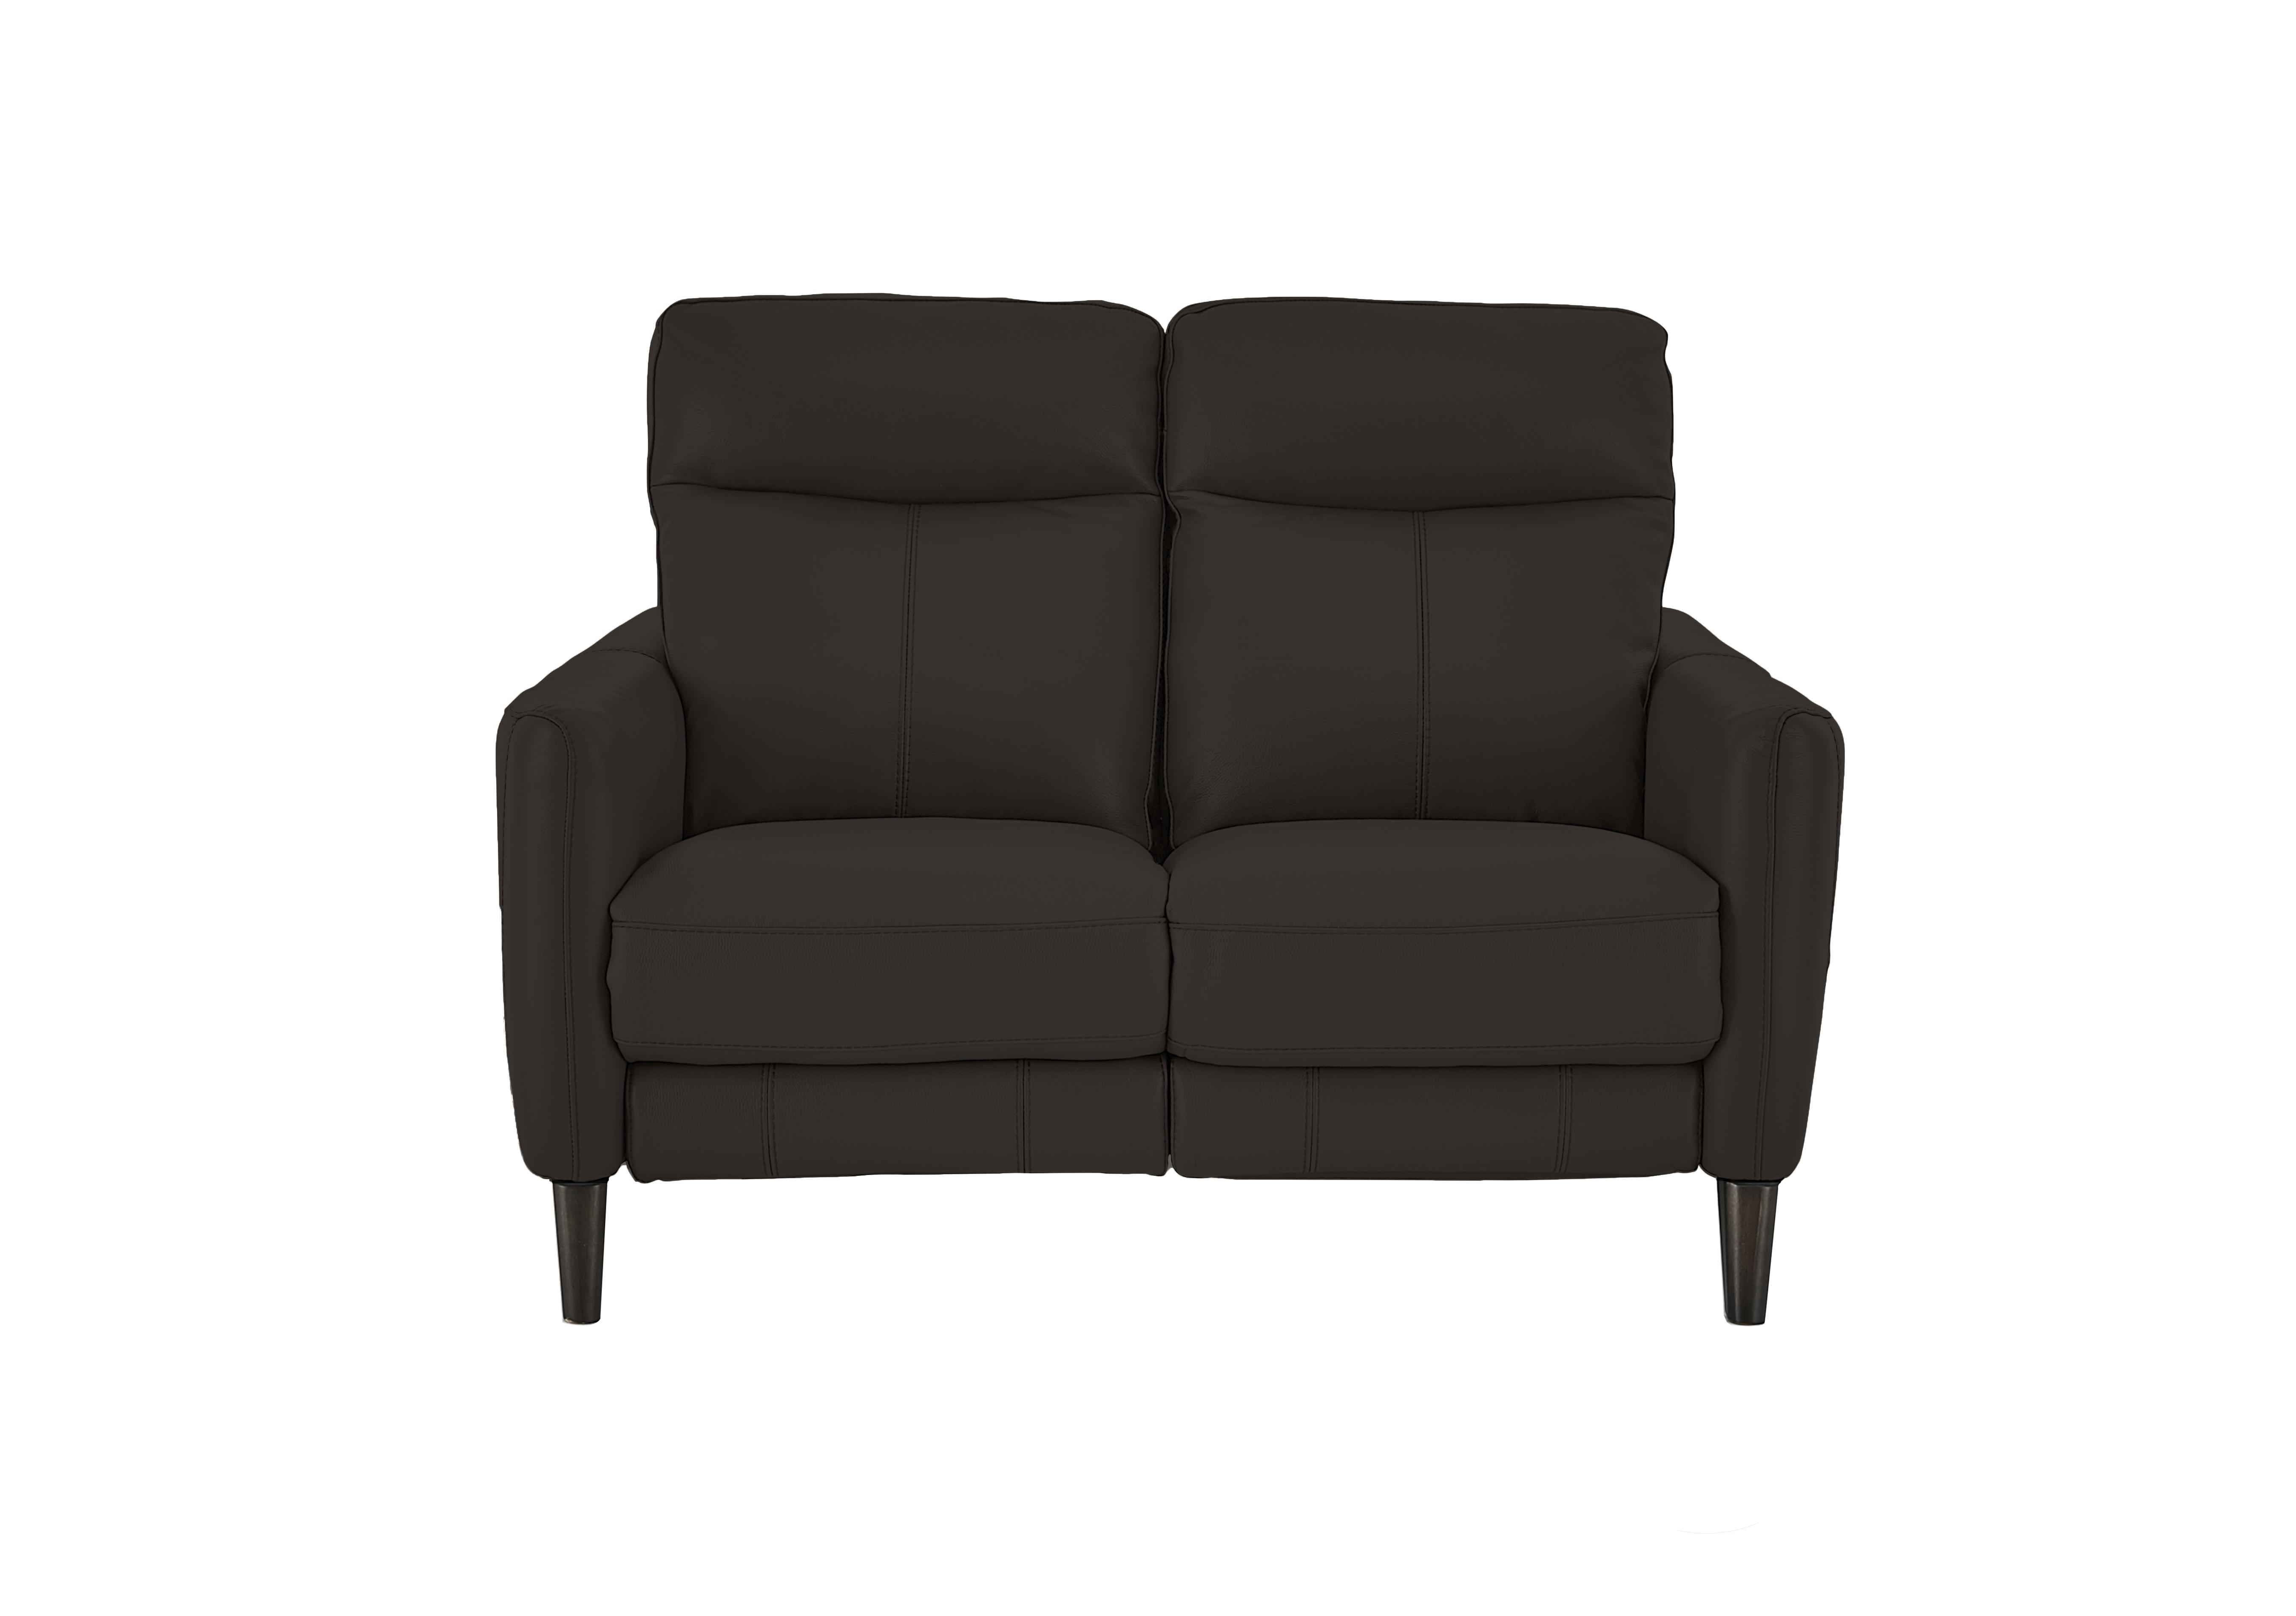 Compact Collection Petit 2 Seater Leather Sofa in Bv-1748 Dark Chocolate on Furniture Village